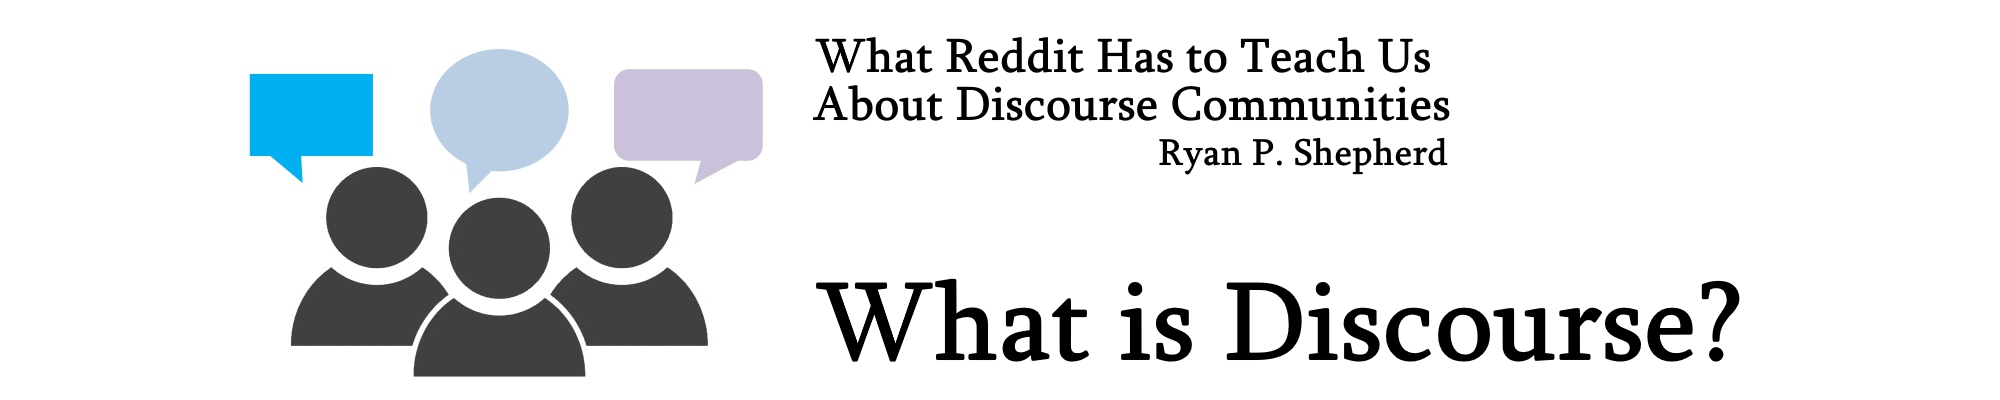 Banner that Reads What Reddit Has to Teach Us About Discourse Communities and What is Discourse?